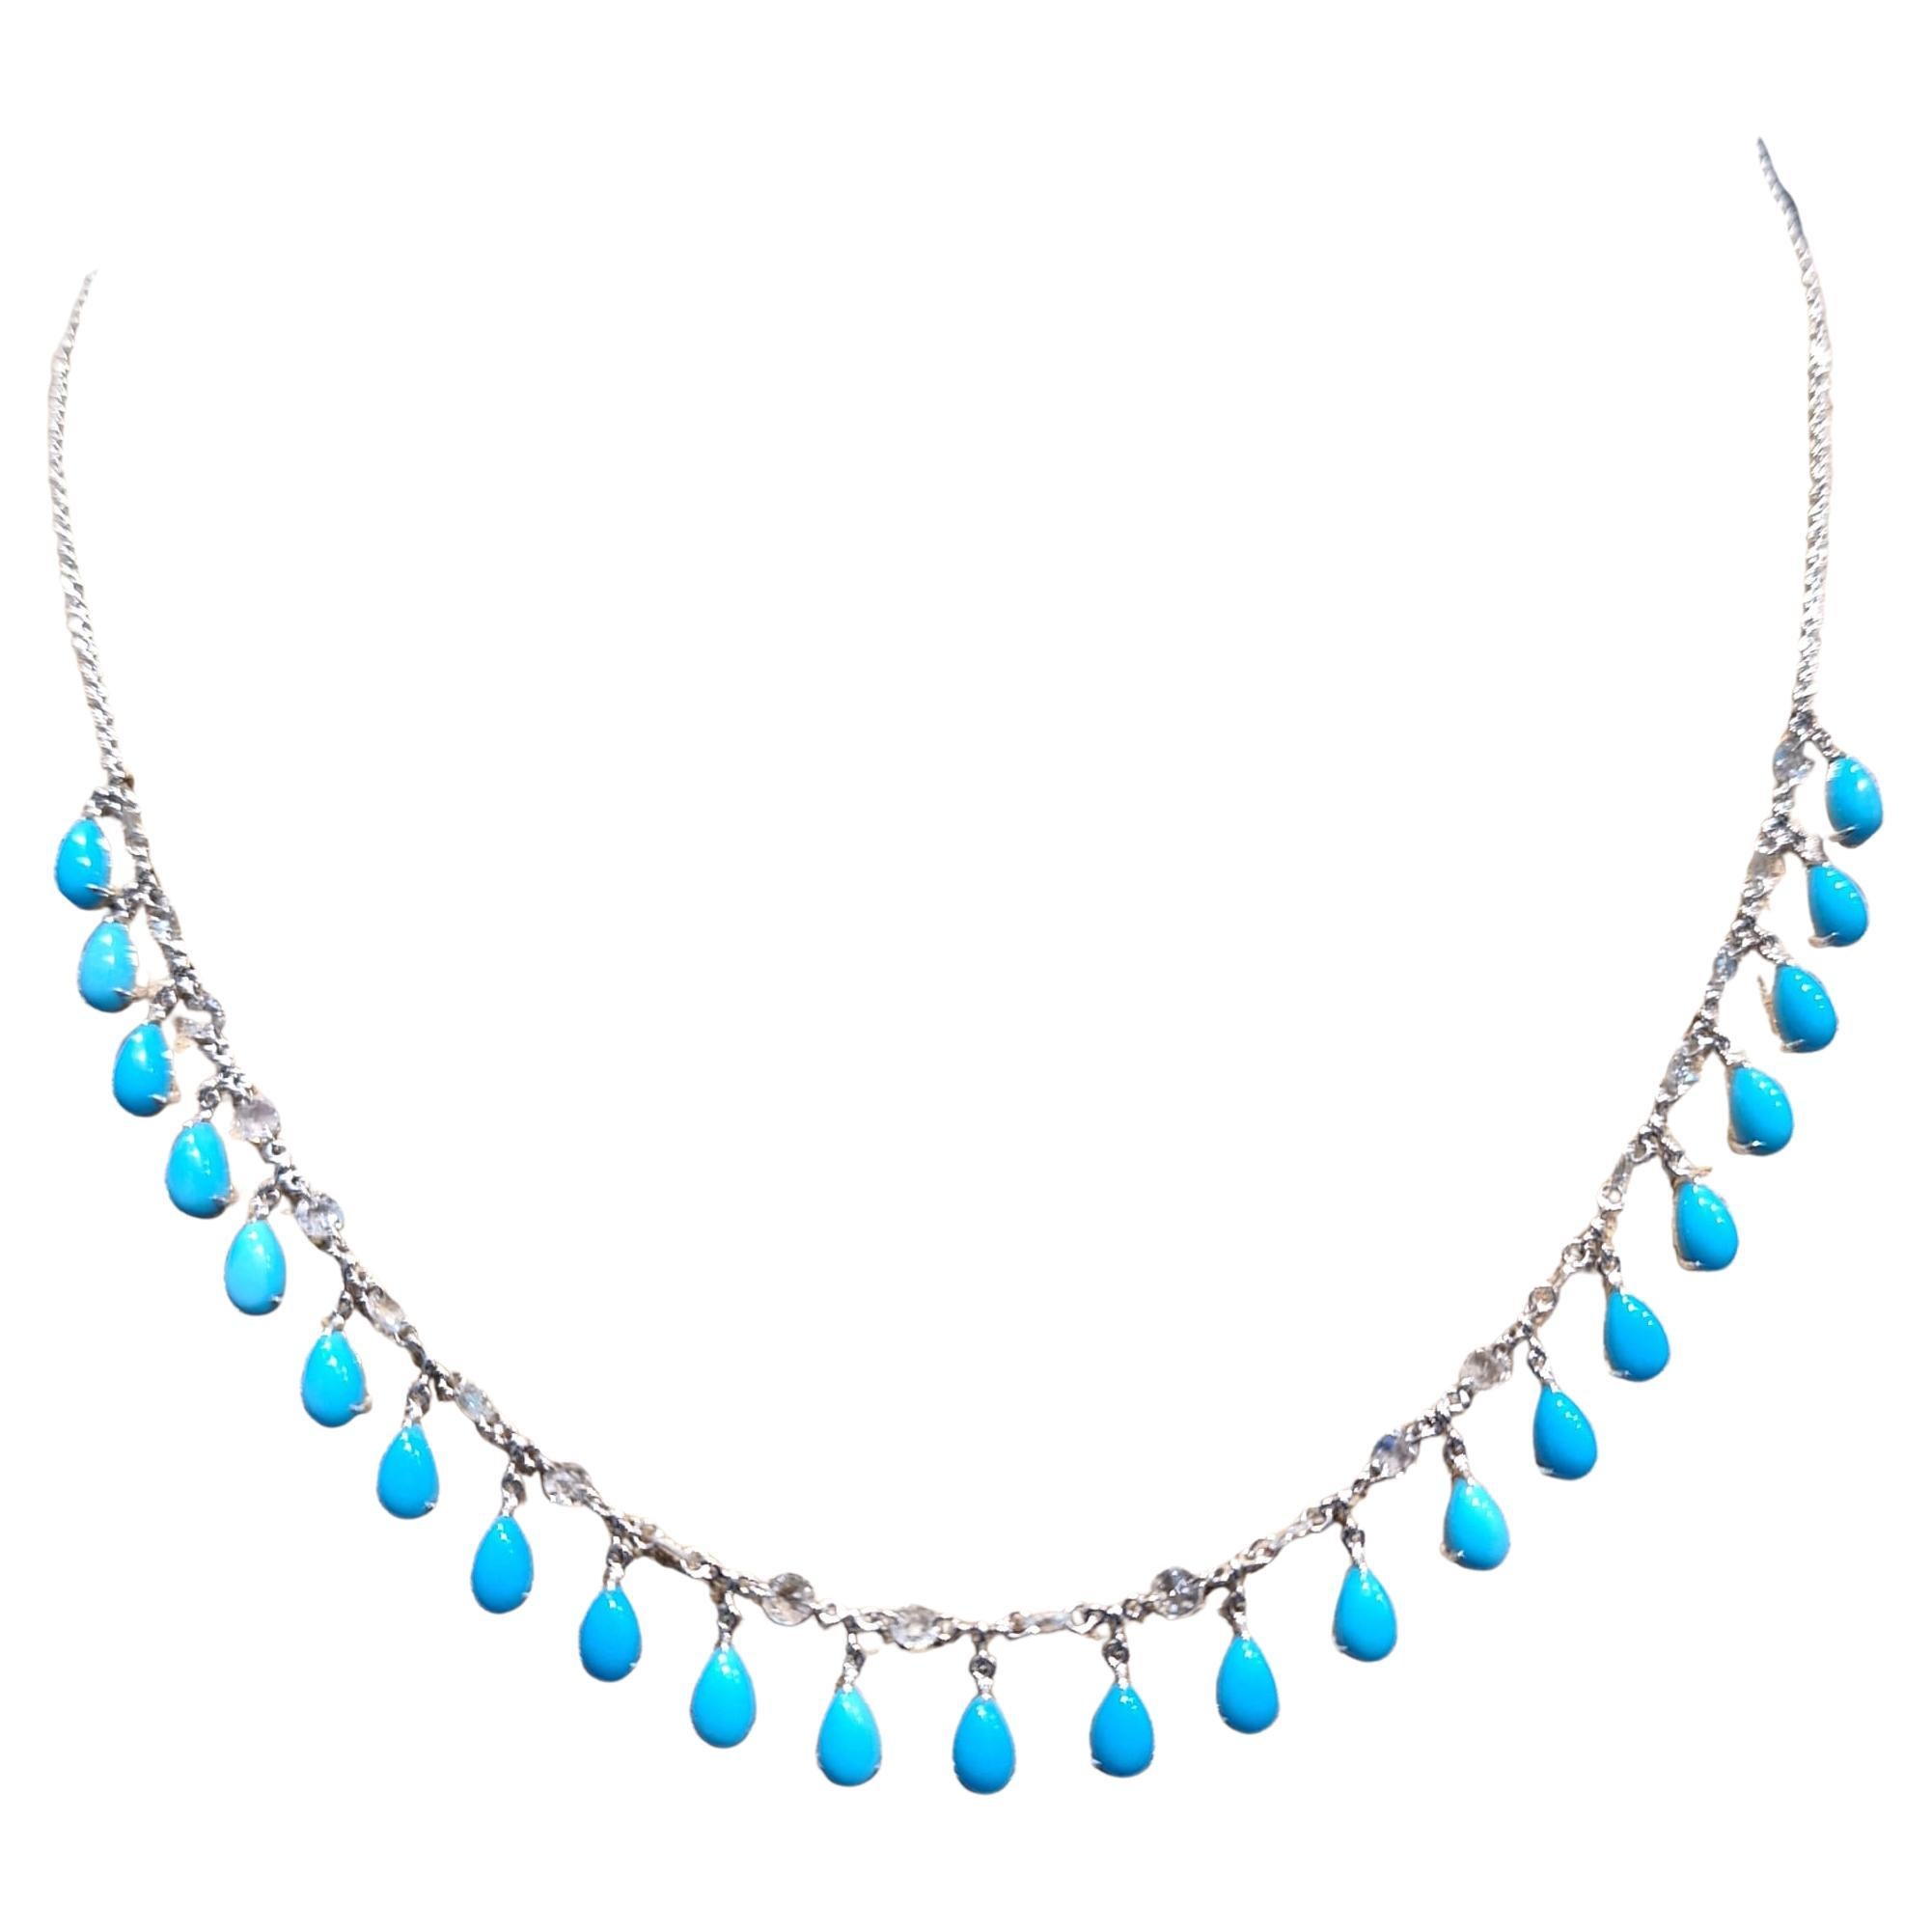 18K White Gold Diamond Necklace with Turquoise For Sale